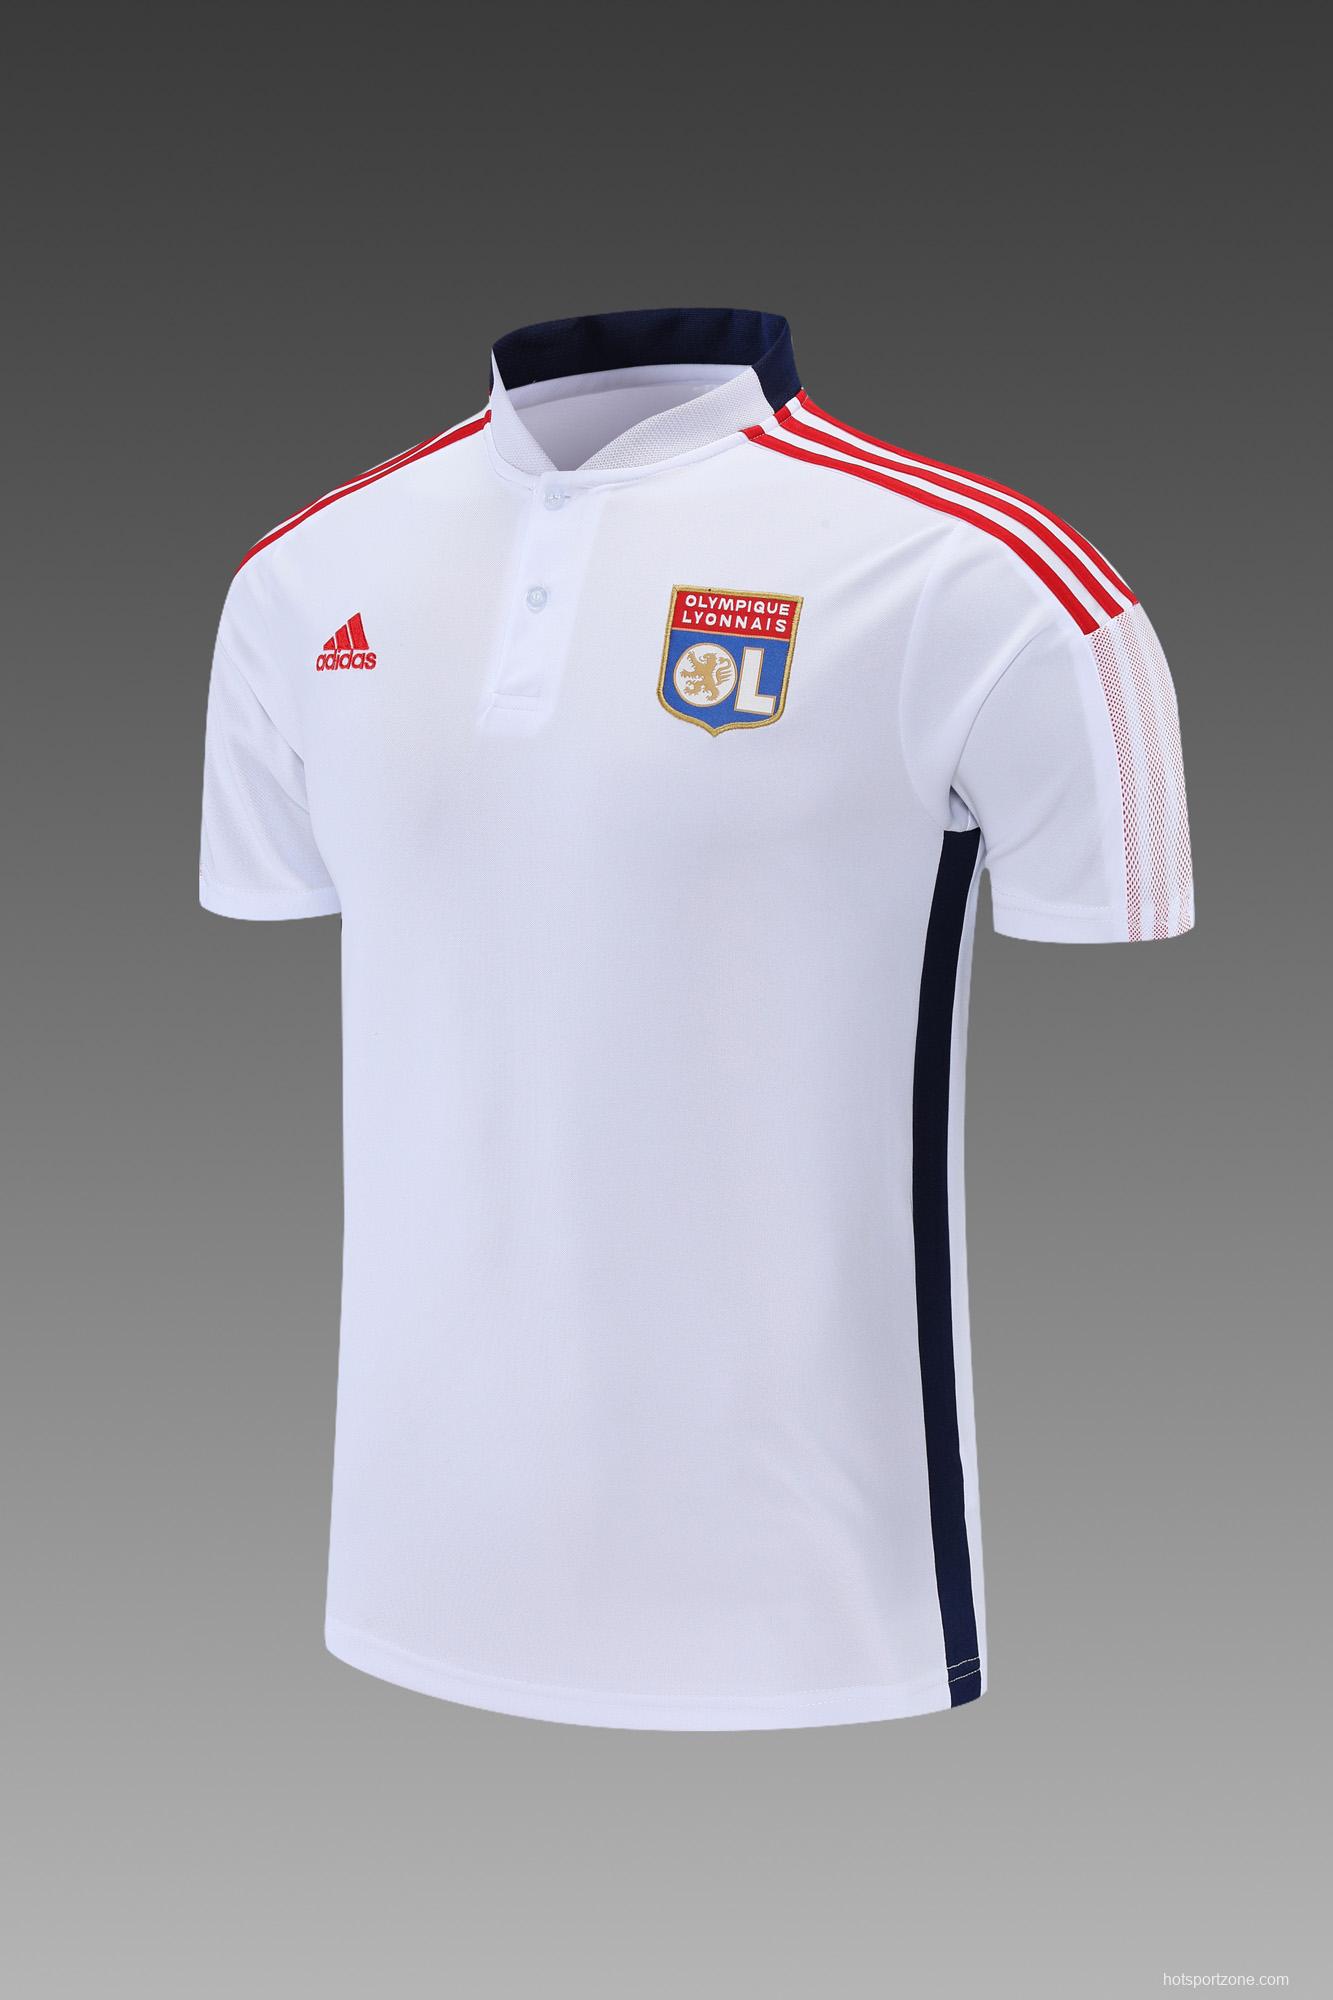 Olympique Lyonnais POLO kit red (not supported to be sold separately)